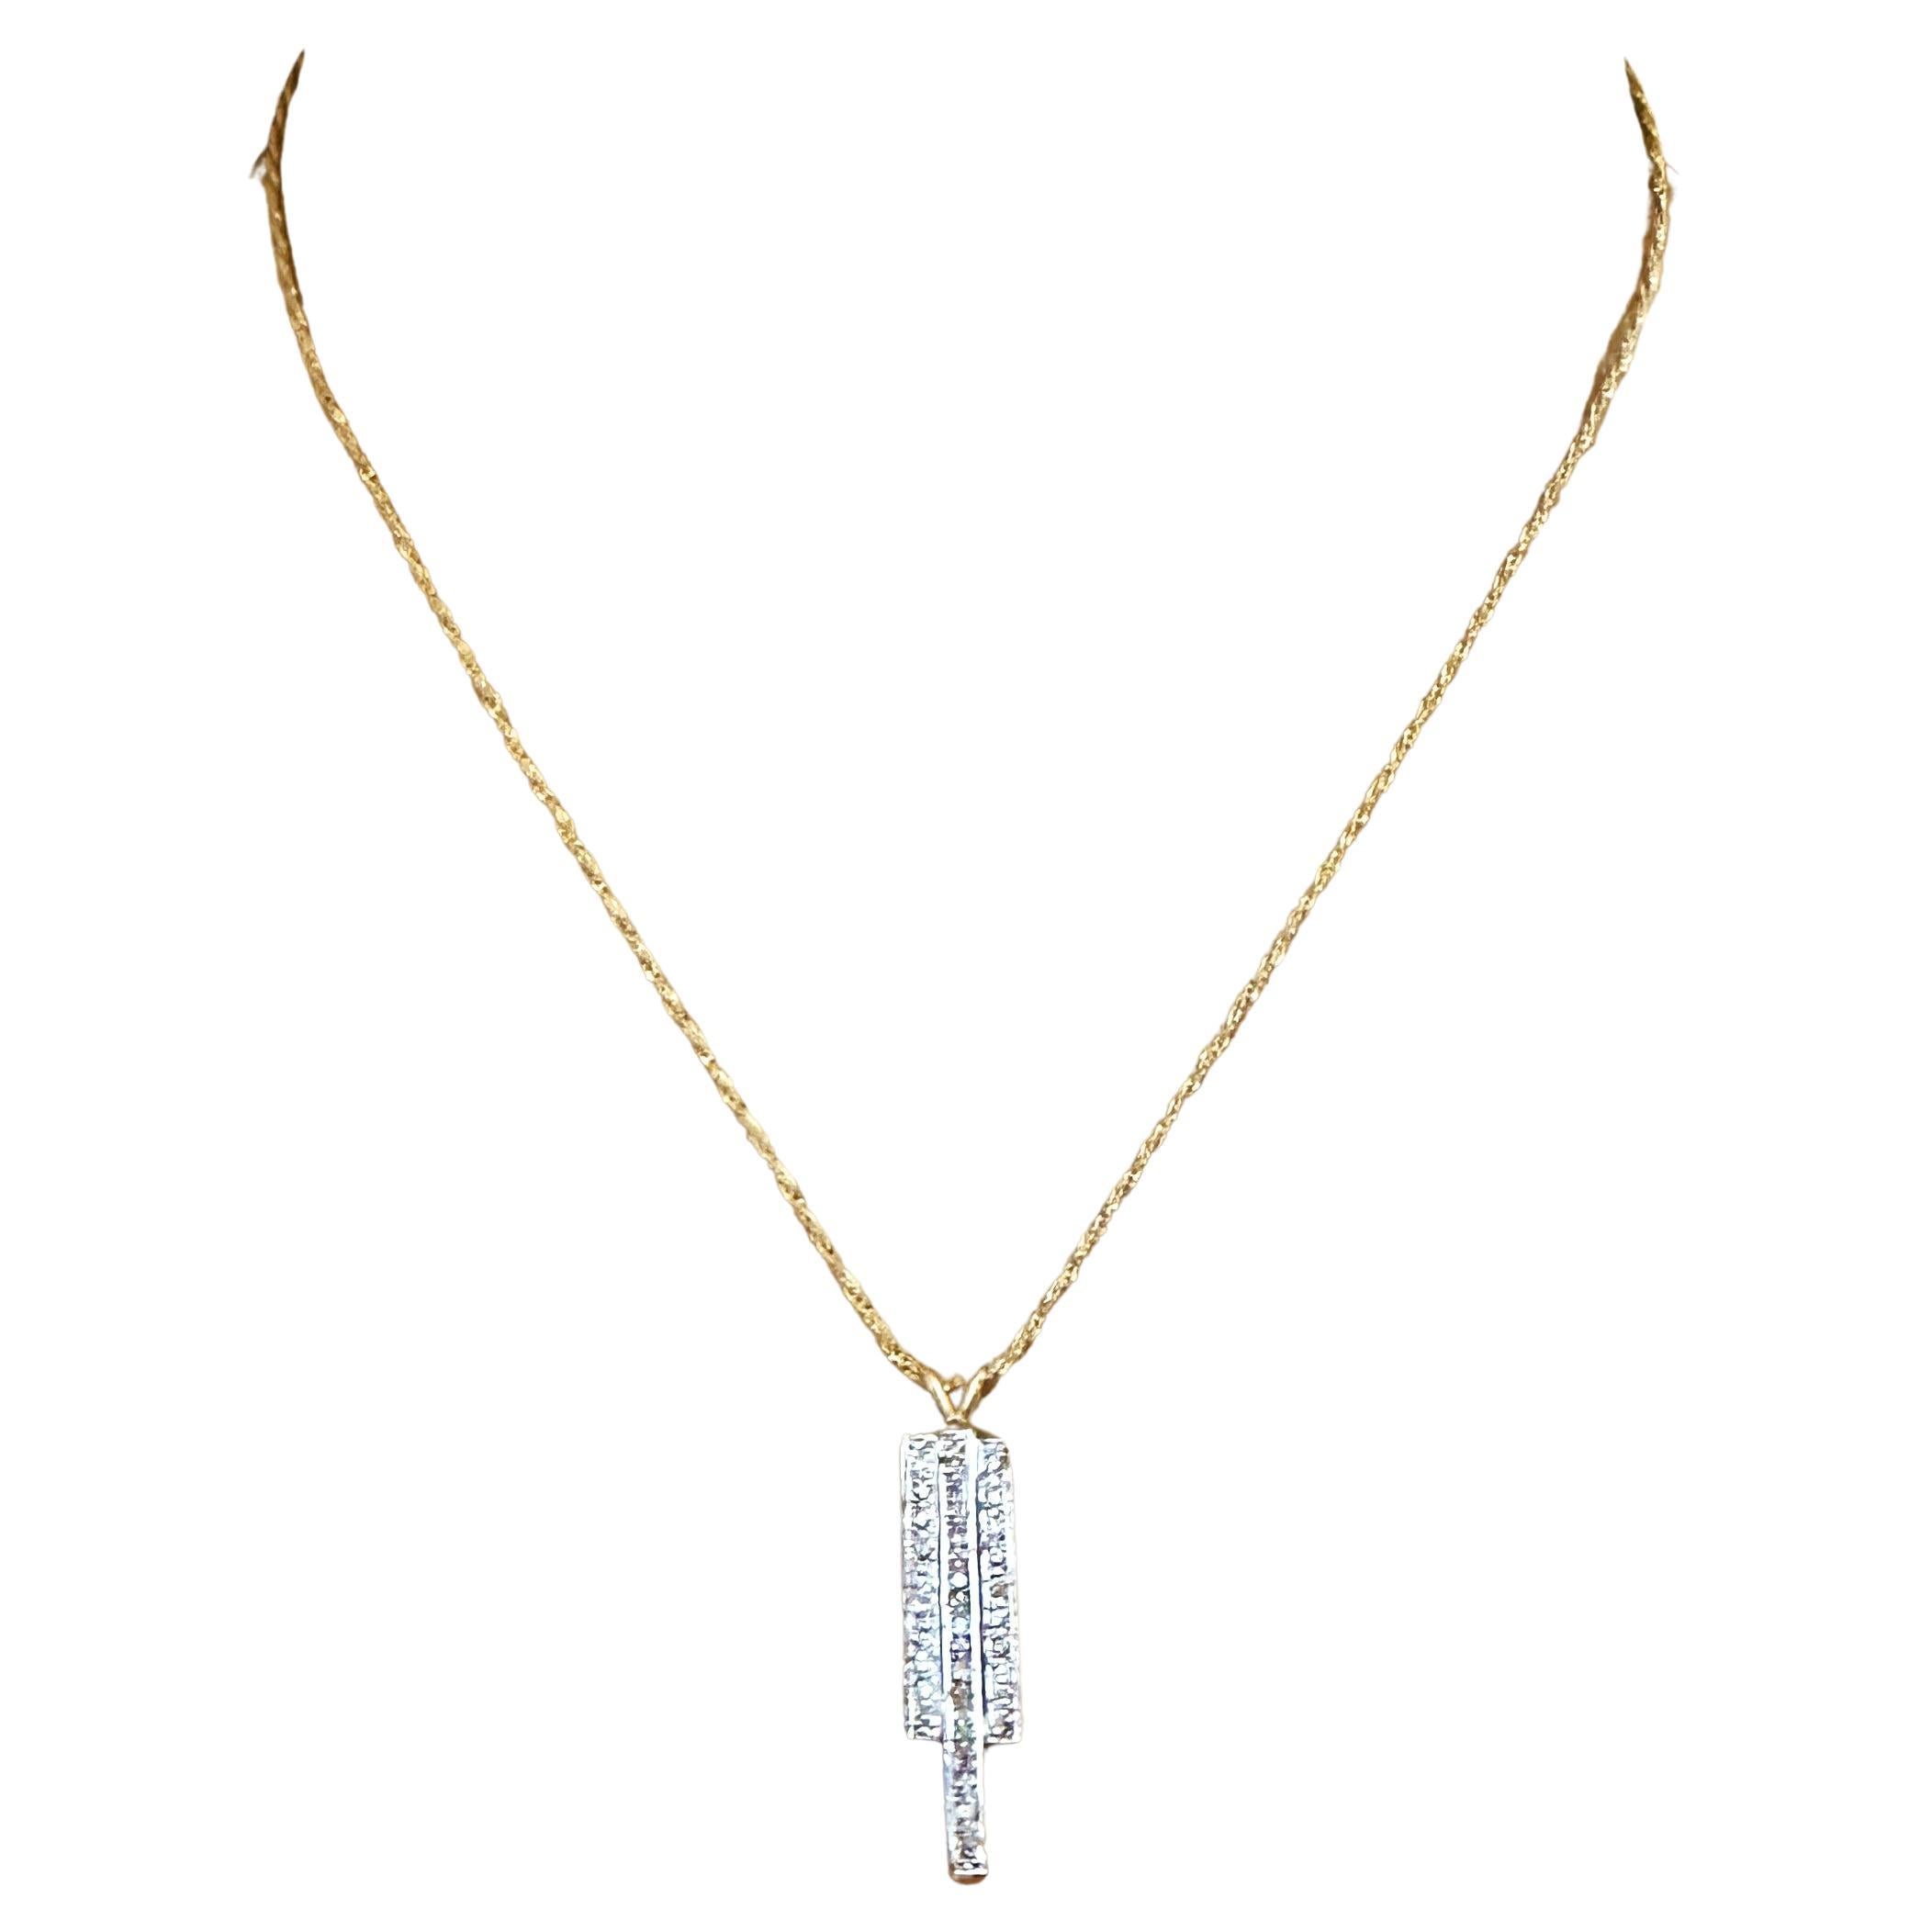 I just love this necklace!  The design is just so cool.  It has 35 brilliant cut diamonds measuring  2.0 x 2.0 x 1.4 mm.  The Clarity is SI1 and the Color is H.  They total 1.25 carats.  The necklace is 16 inches long. It's stamped 